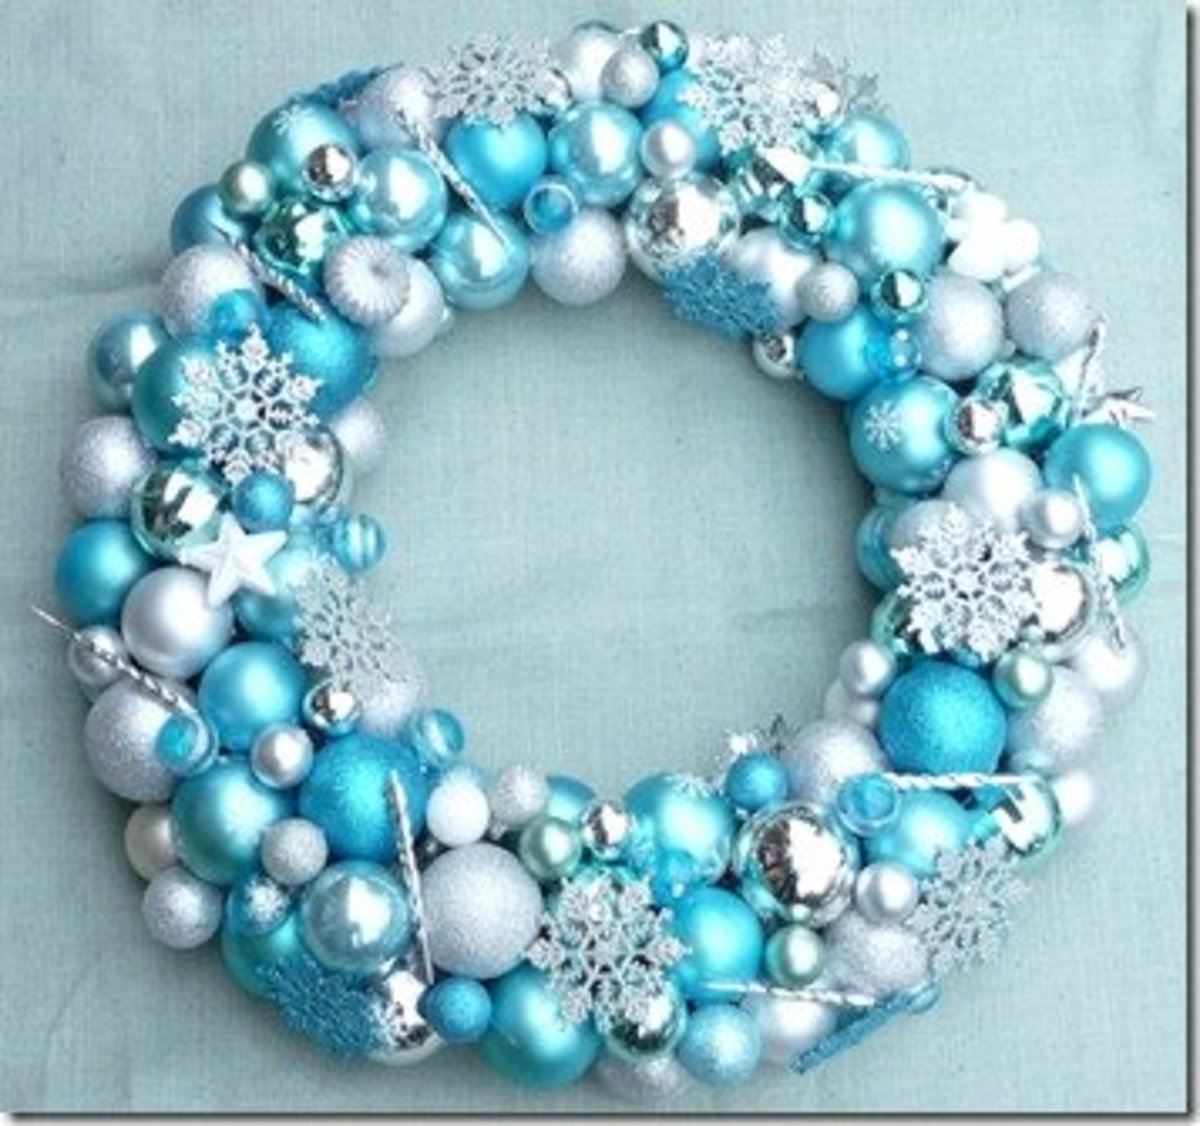 I'll show you how to make a Christmas ball ornament wreath like this. It's not as hard as you think!